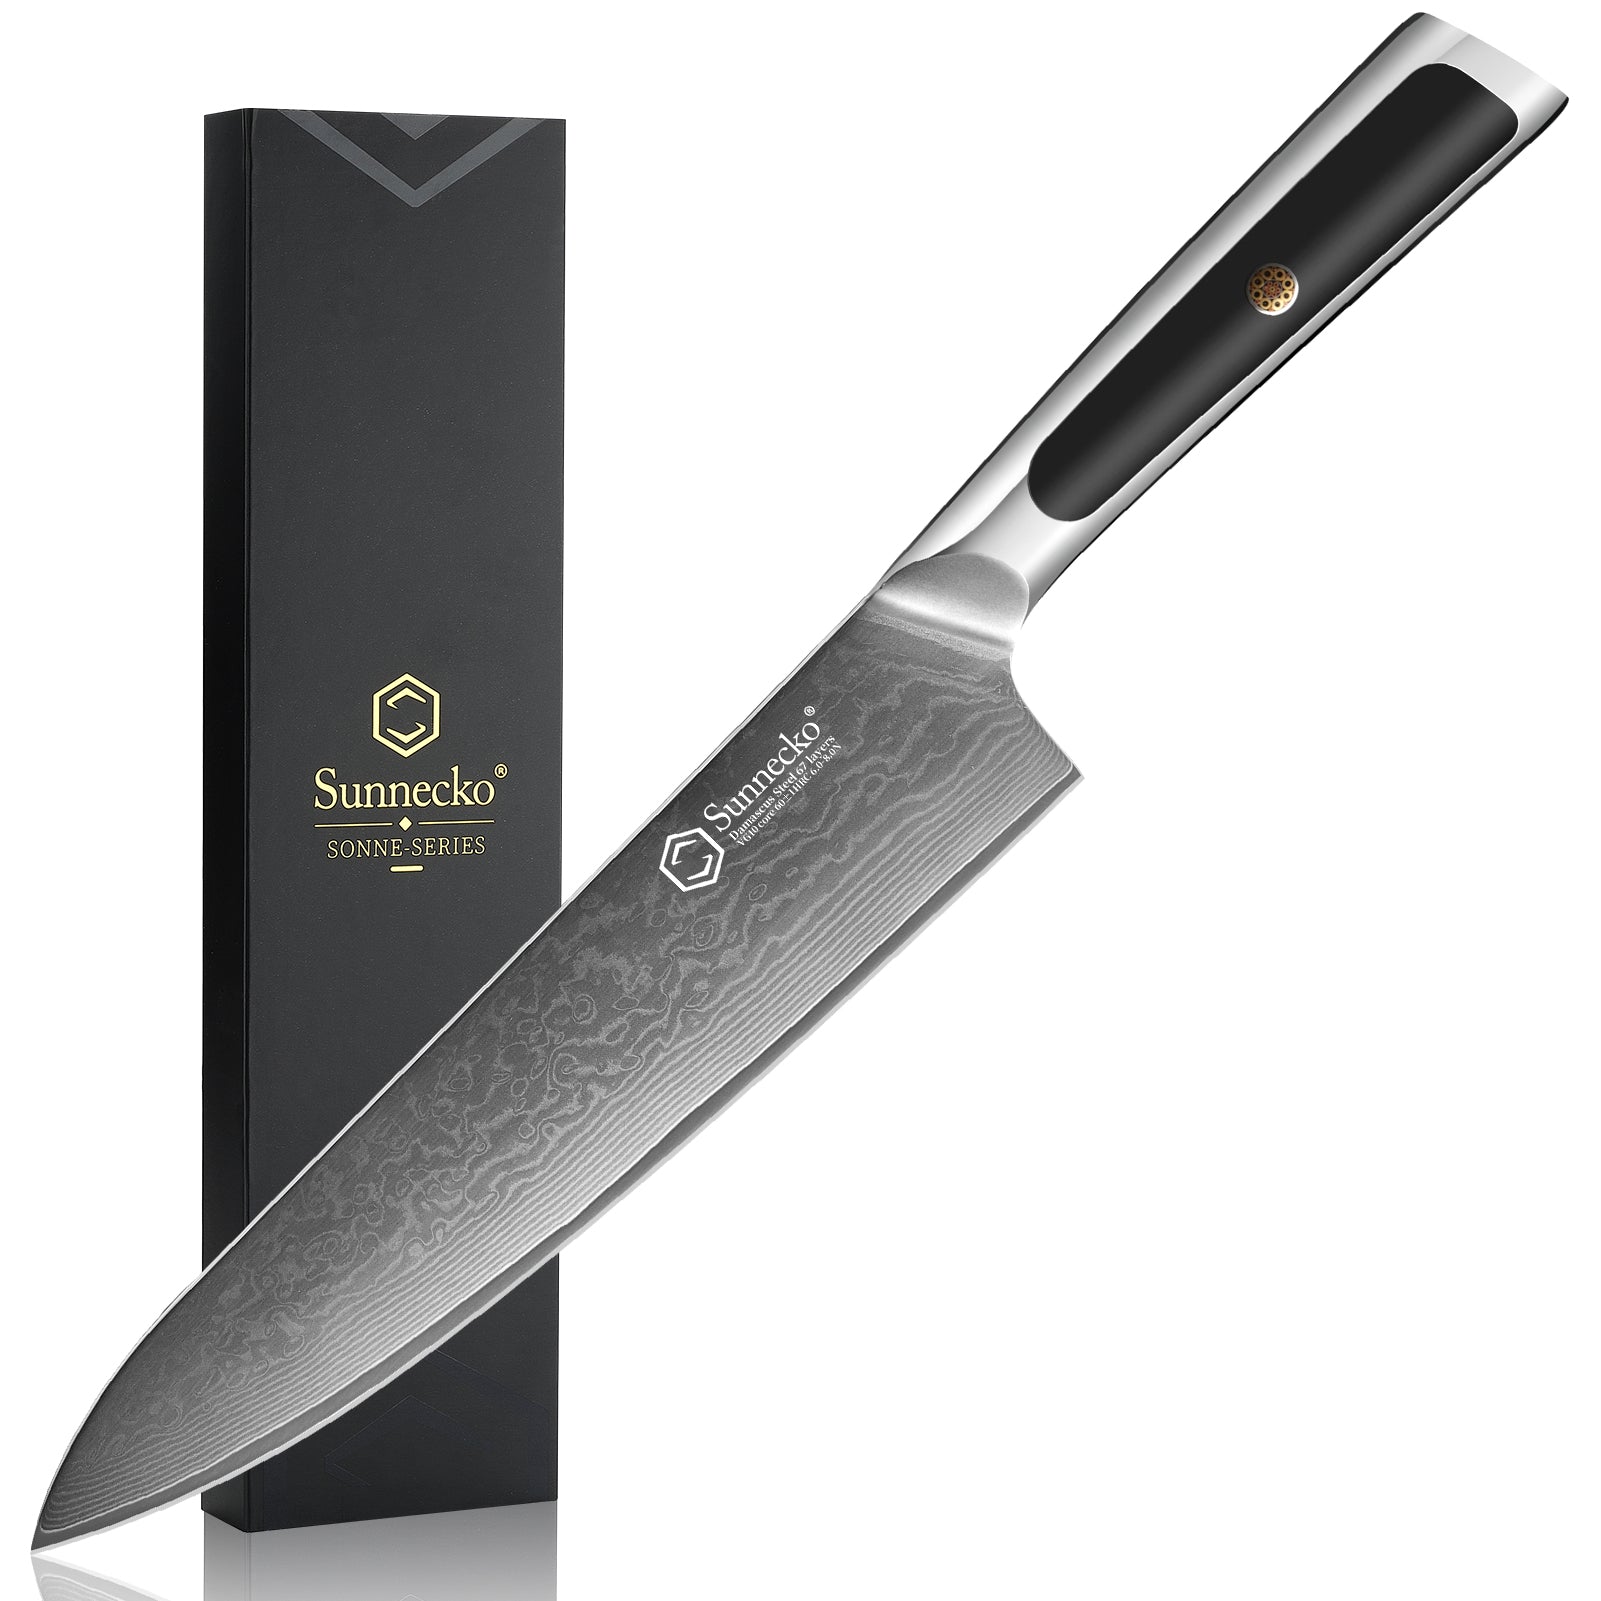 Best Quality 8 Inch Professional Kitchen Knives Stainless Steel